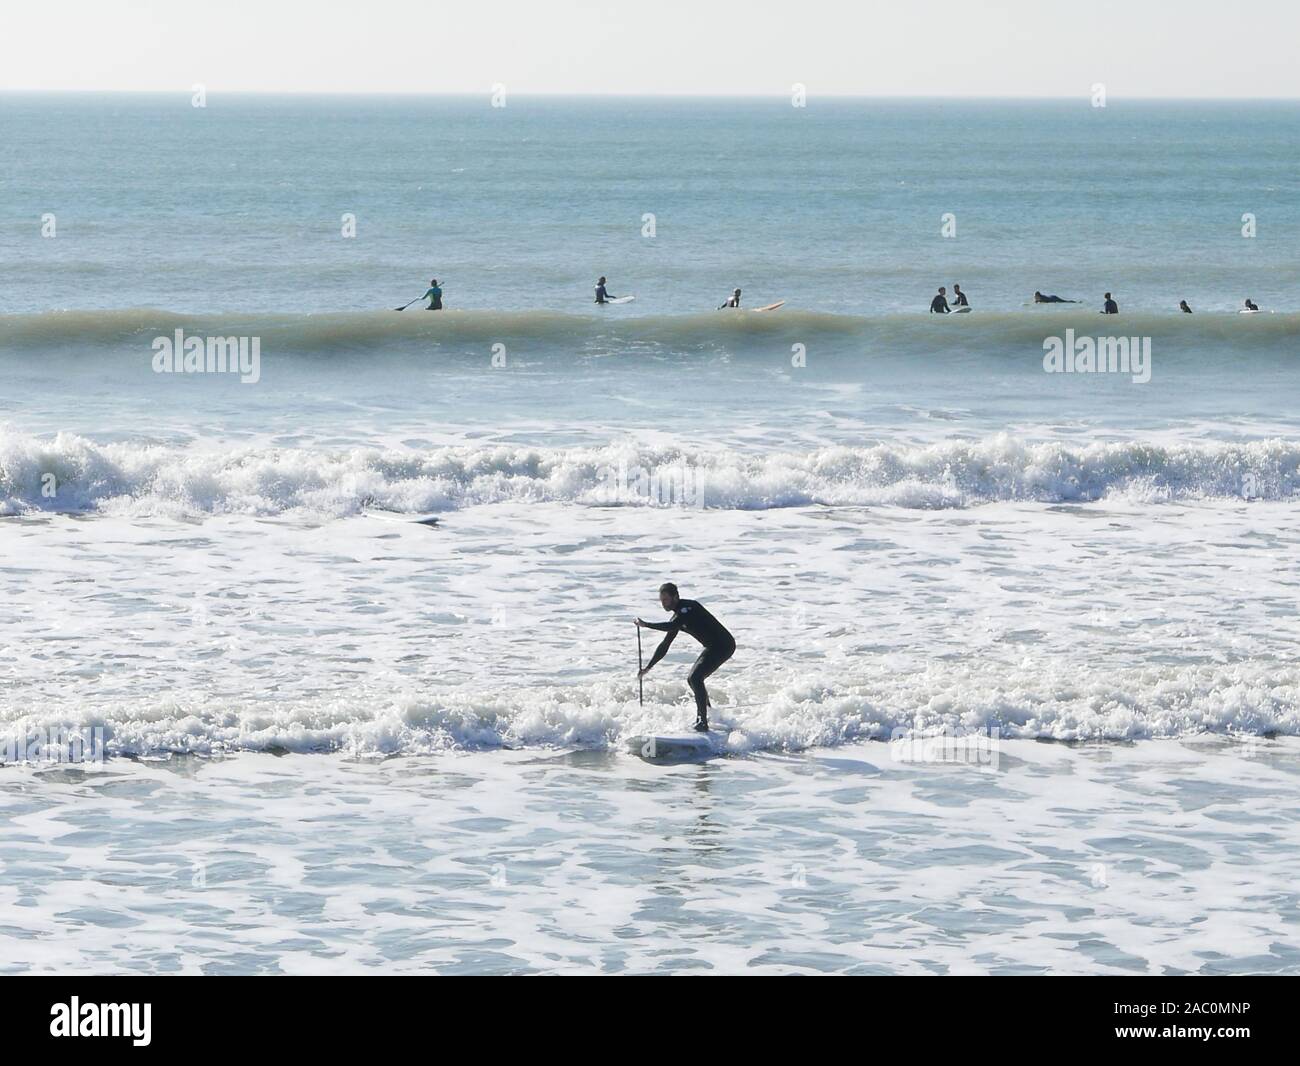 Winter surfing at Selsey beach in February 2019 with a surfer paddling in the waves standing on his surfboard in the shallow seafoam Stock Photo